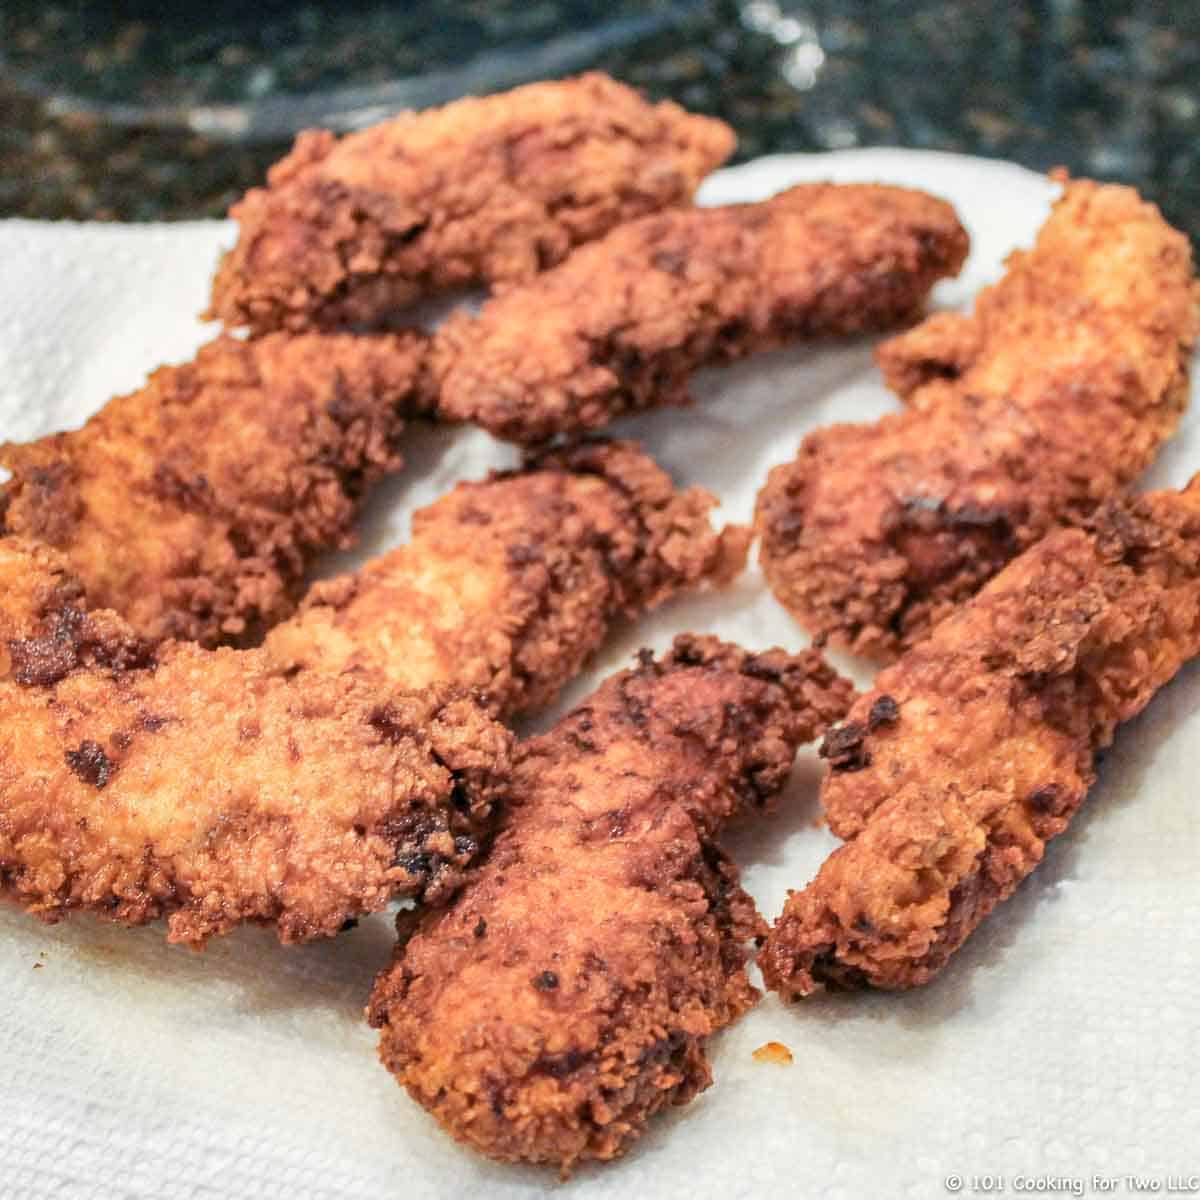 fried chicken tenders draining on a white paper towel